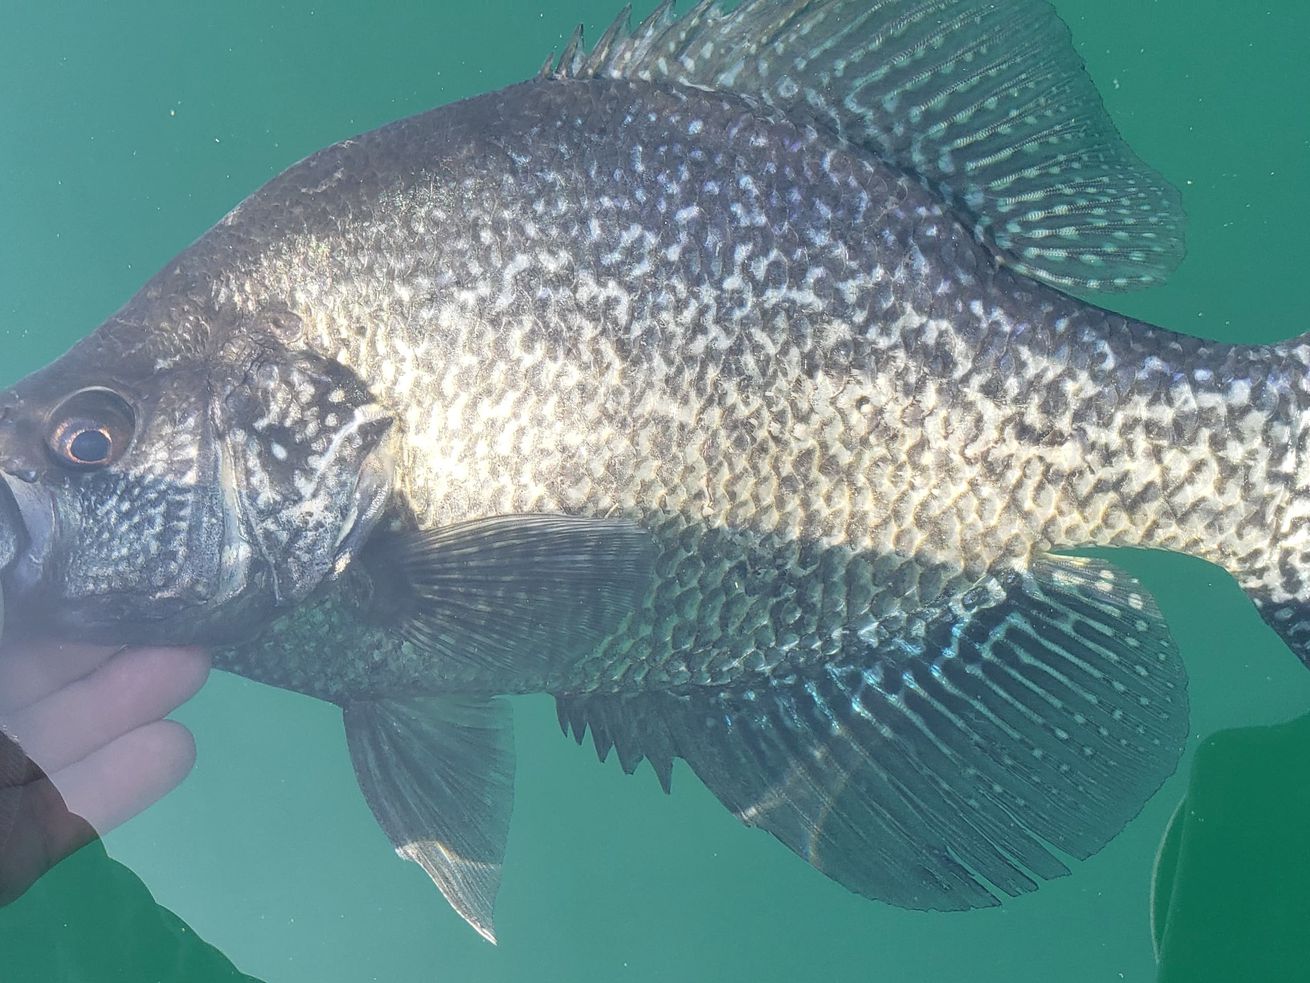 Joseph Christopher Alfe with a big crappie, caught and released at Three Oaks. Provided by Joseph Christopher Alfe